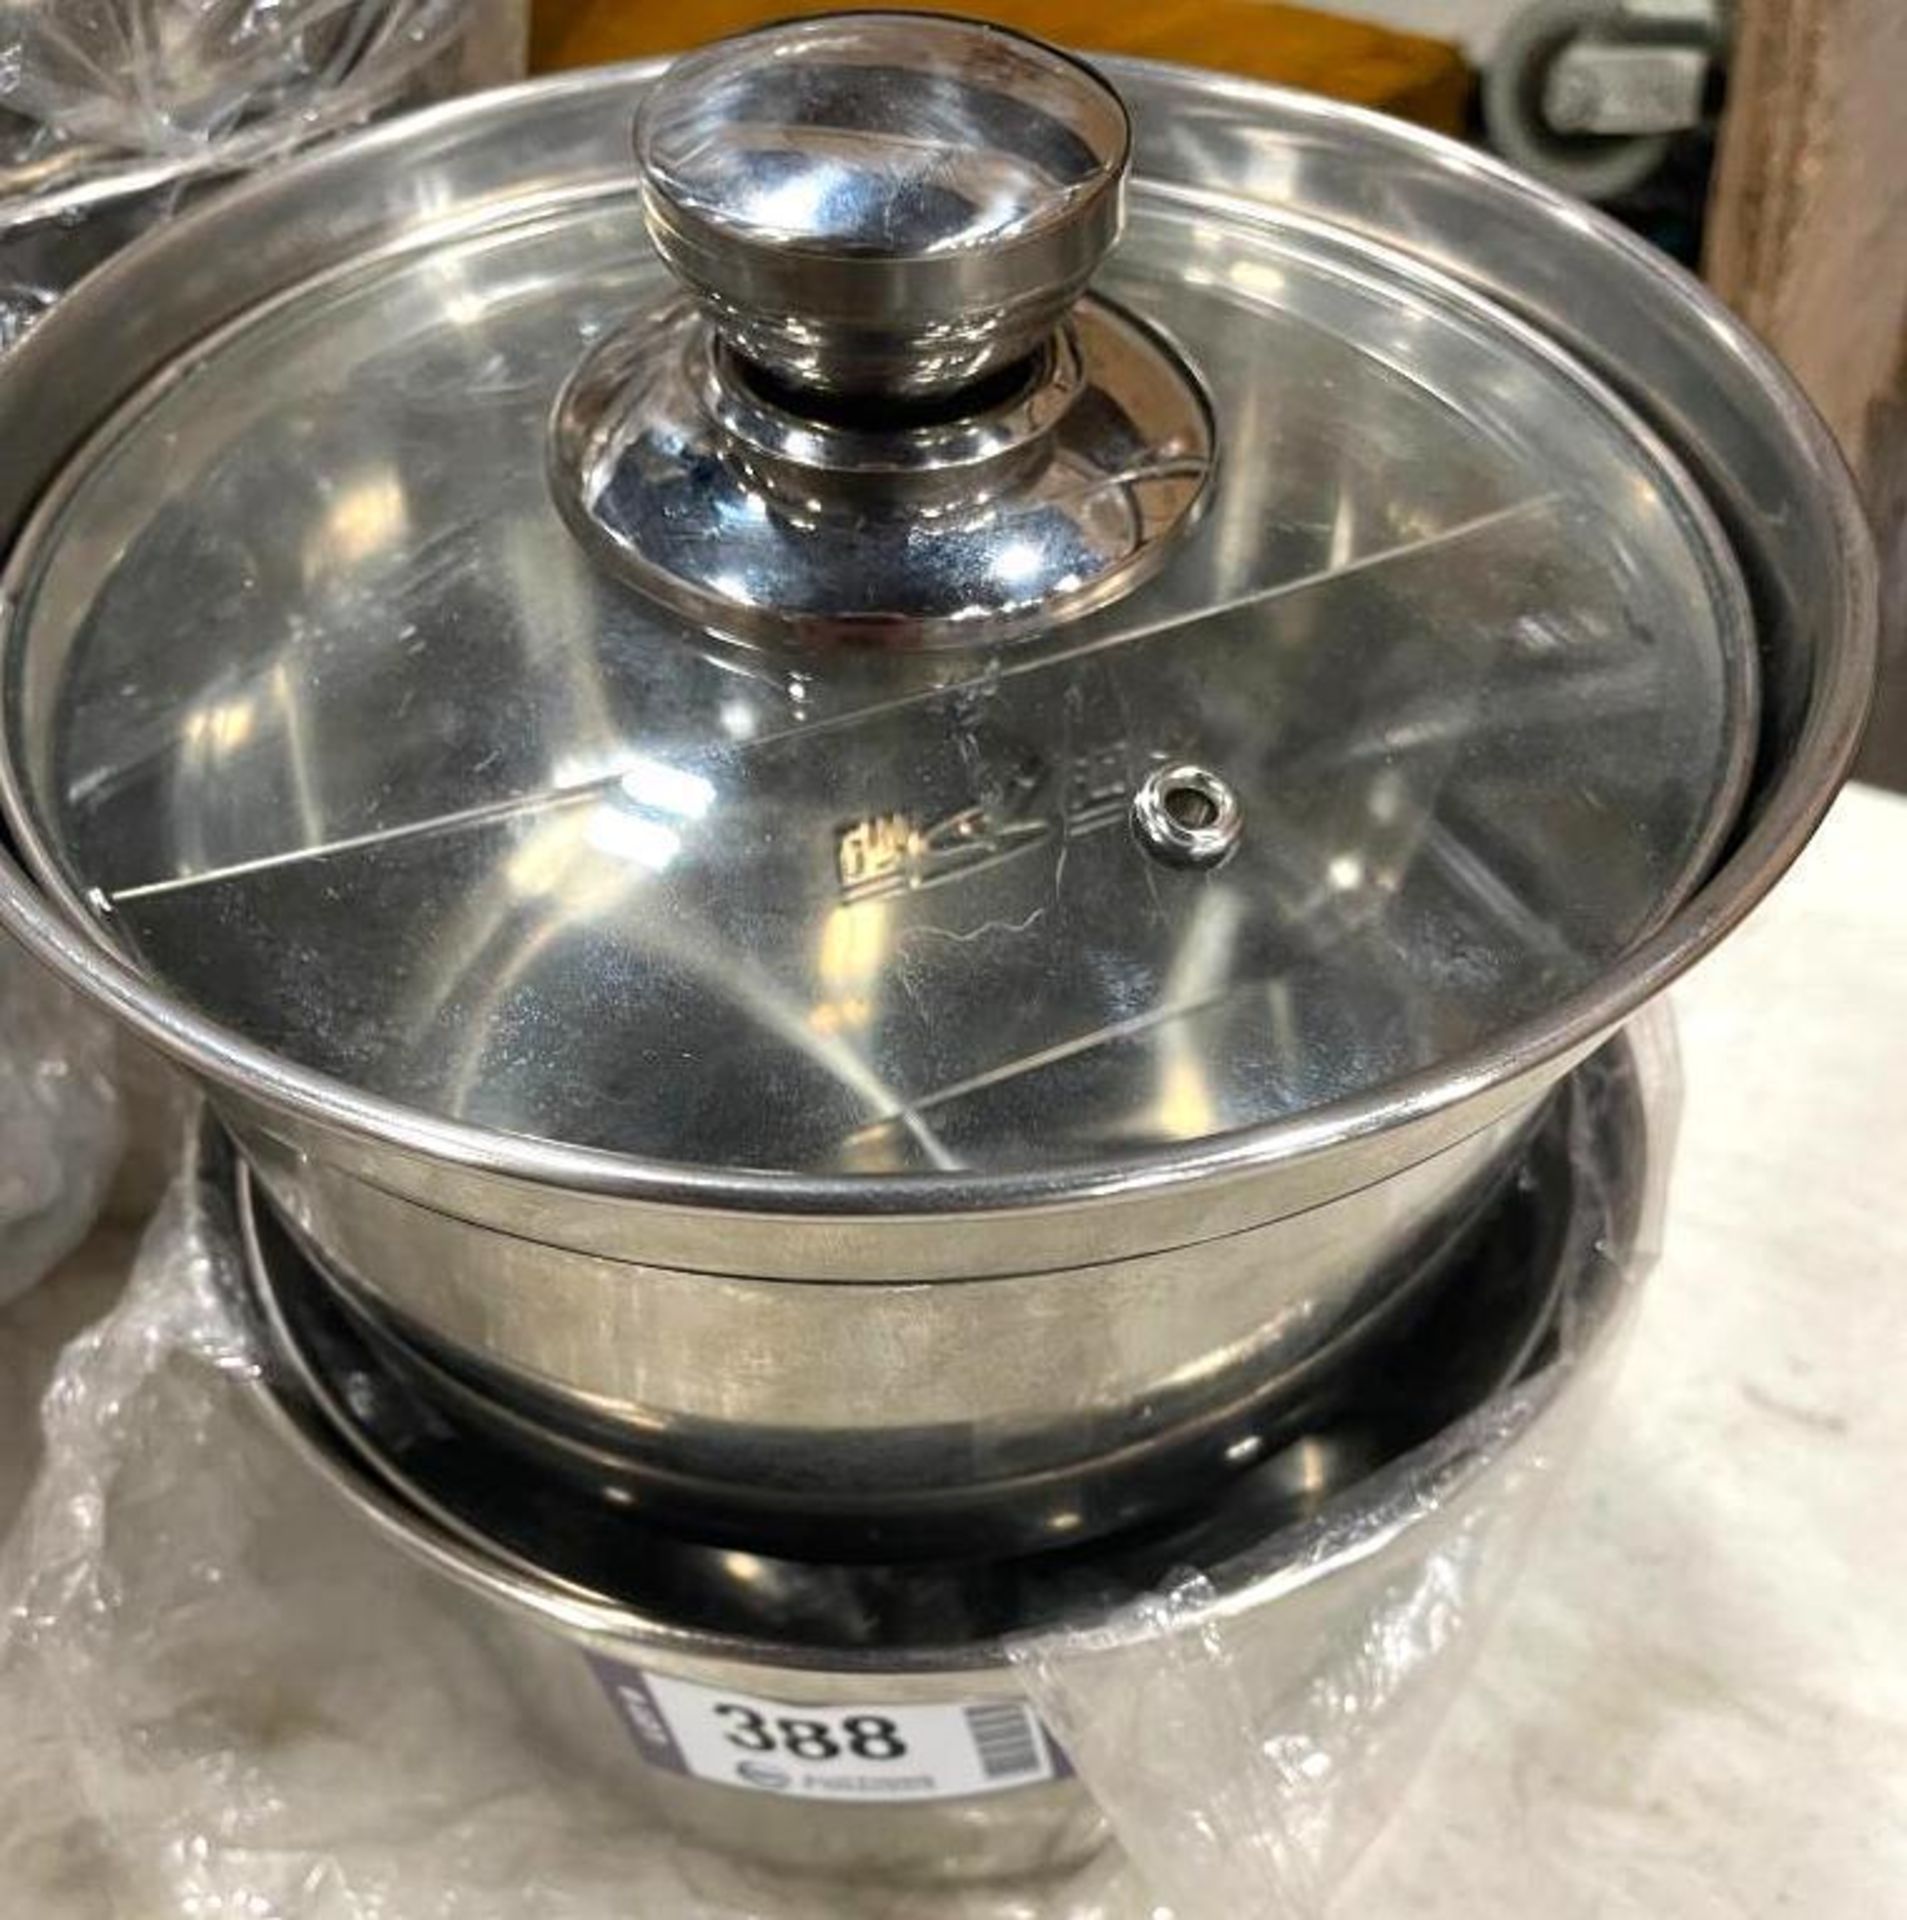 LOT OF (10) TWO-COMPARTMENT ROUND STAINLESS STEEL POT WITH COVERS - Image 2 of 7